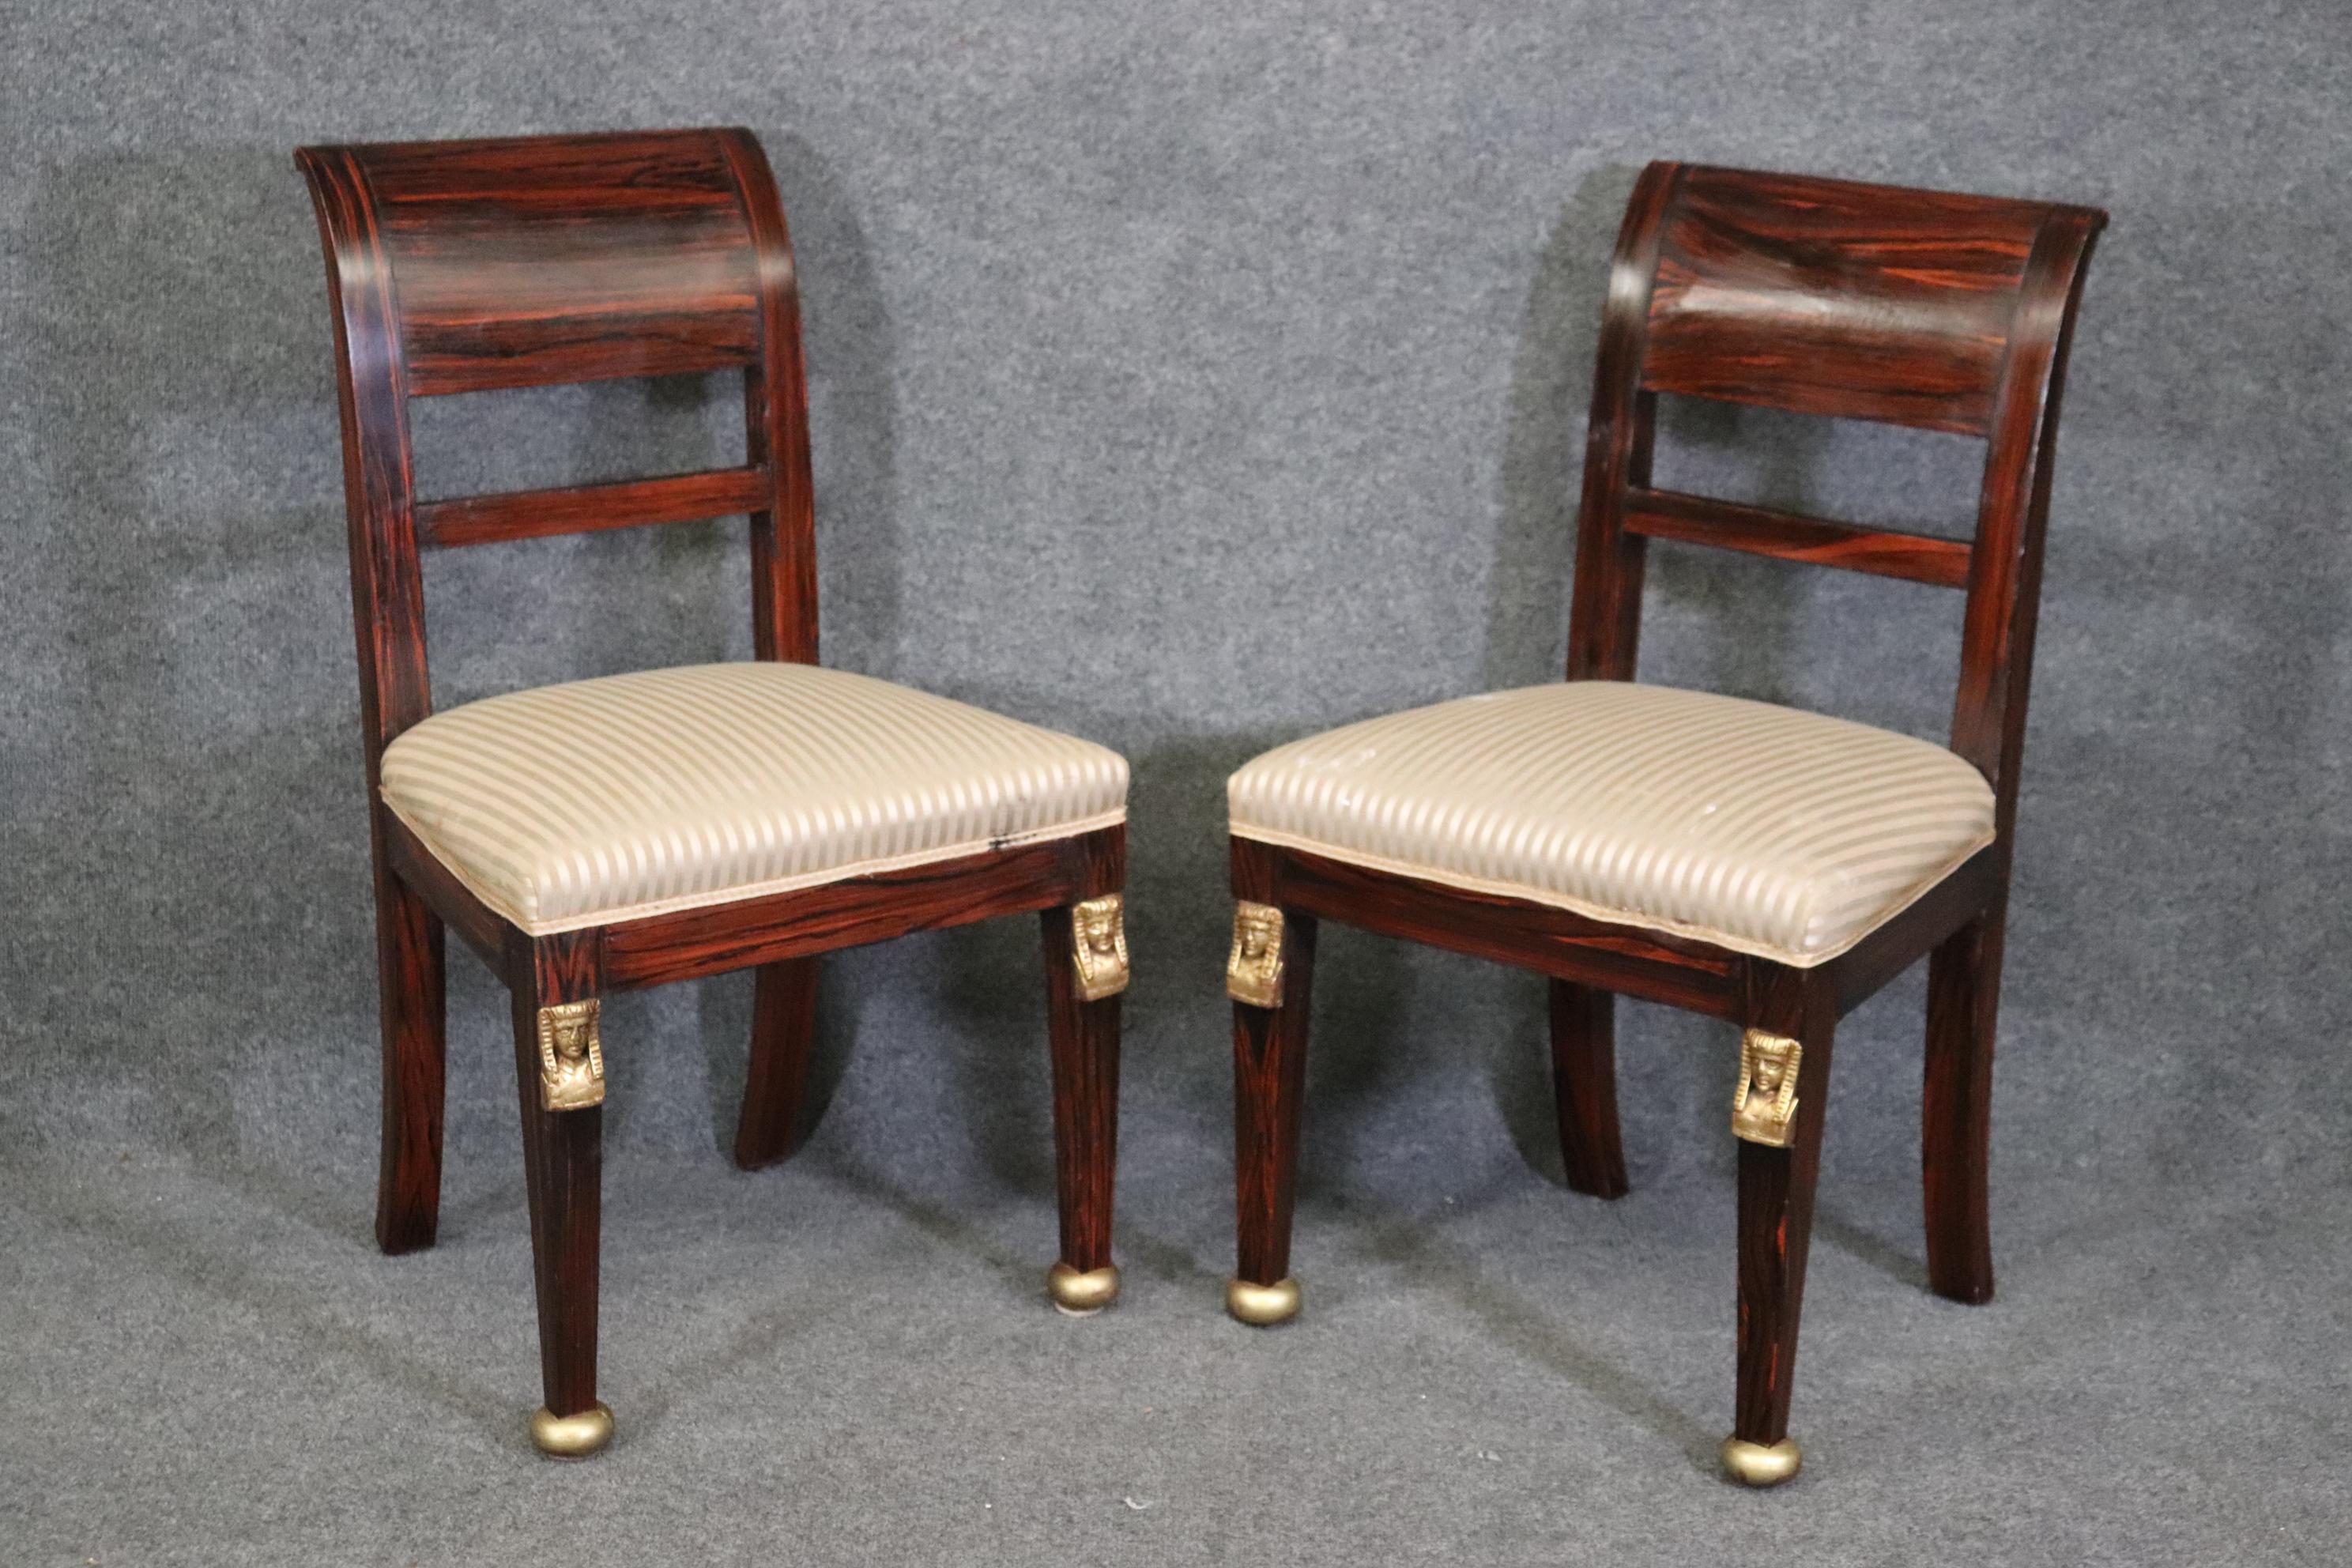 Dimensions: Height: 34 1/4 in Width: 20 in Depth: 18 3/4 in 
                       Seat Height: 18 3/4 in 

This 19th century set of 10 French Empire dining room side chairs is of the highest quality!  These chairs are perfect for you and your home